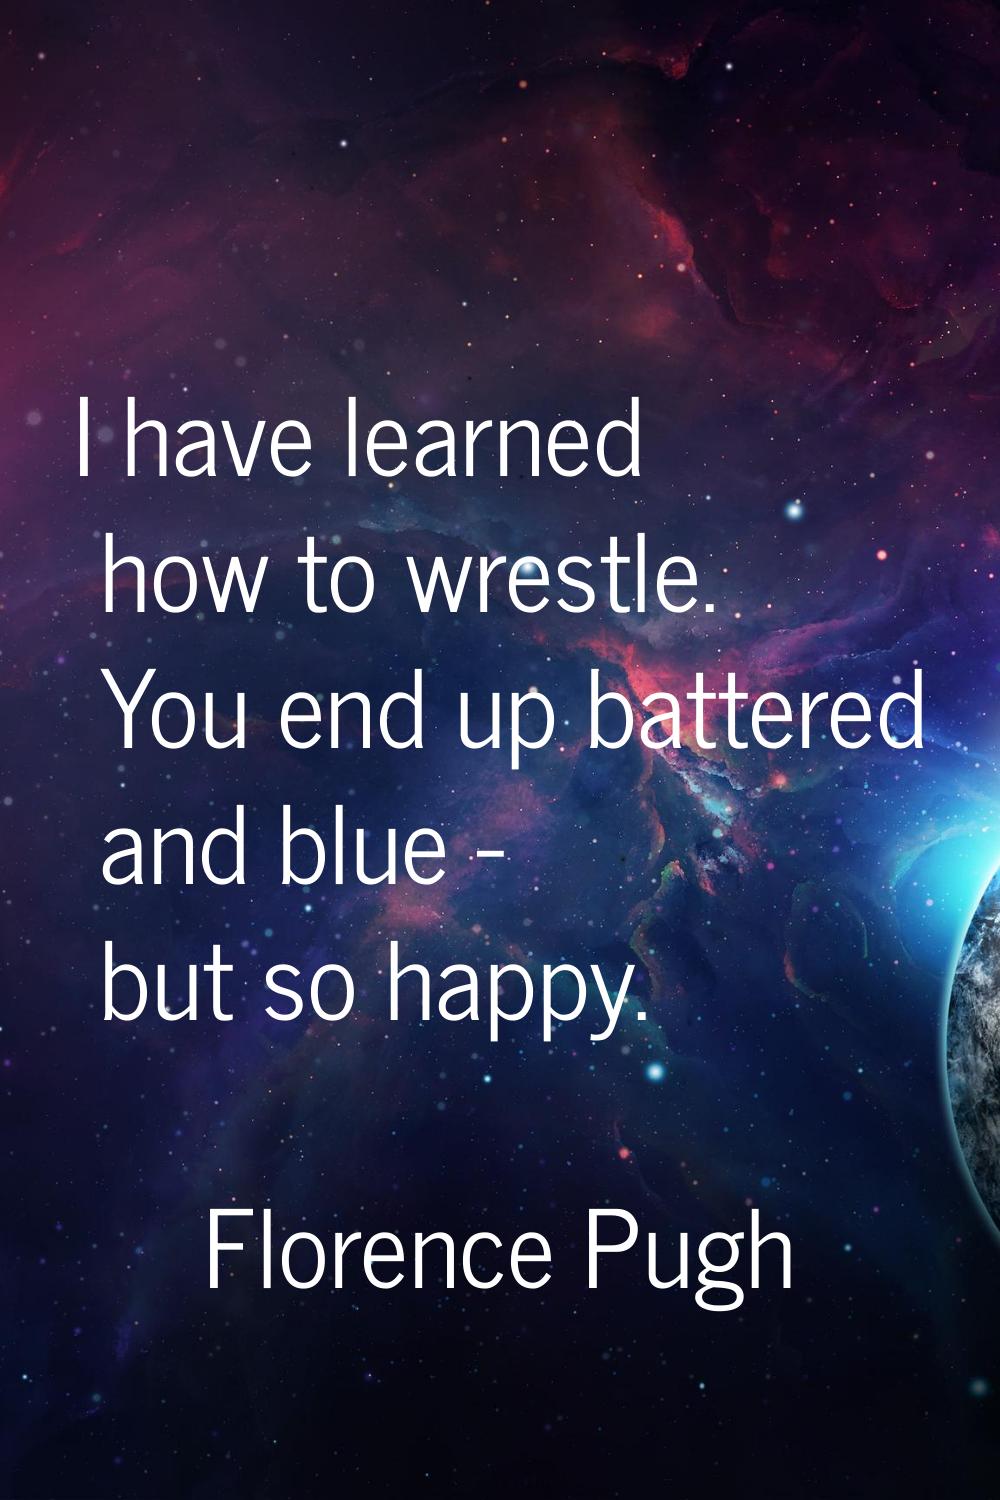 I have learned how to wrestle. You end up battered and blue - but so happy.